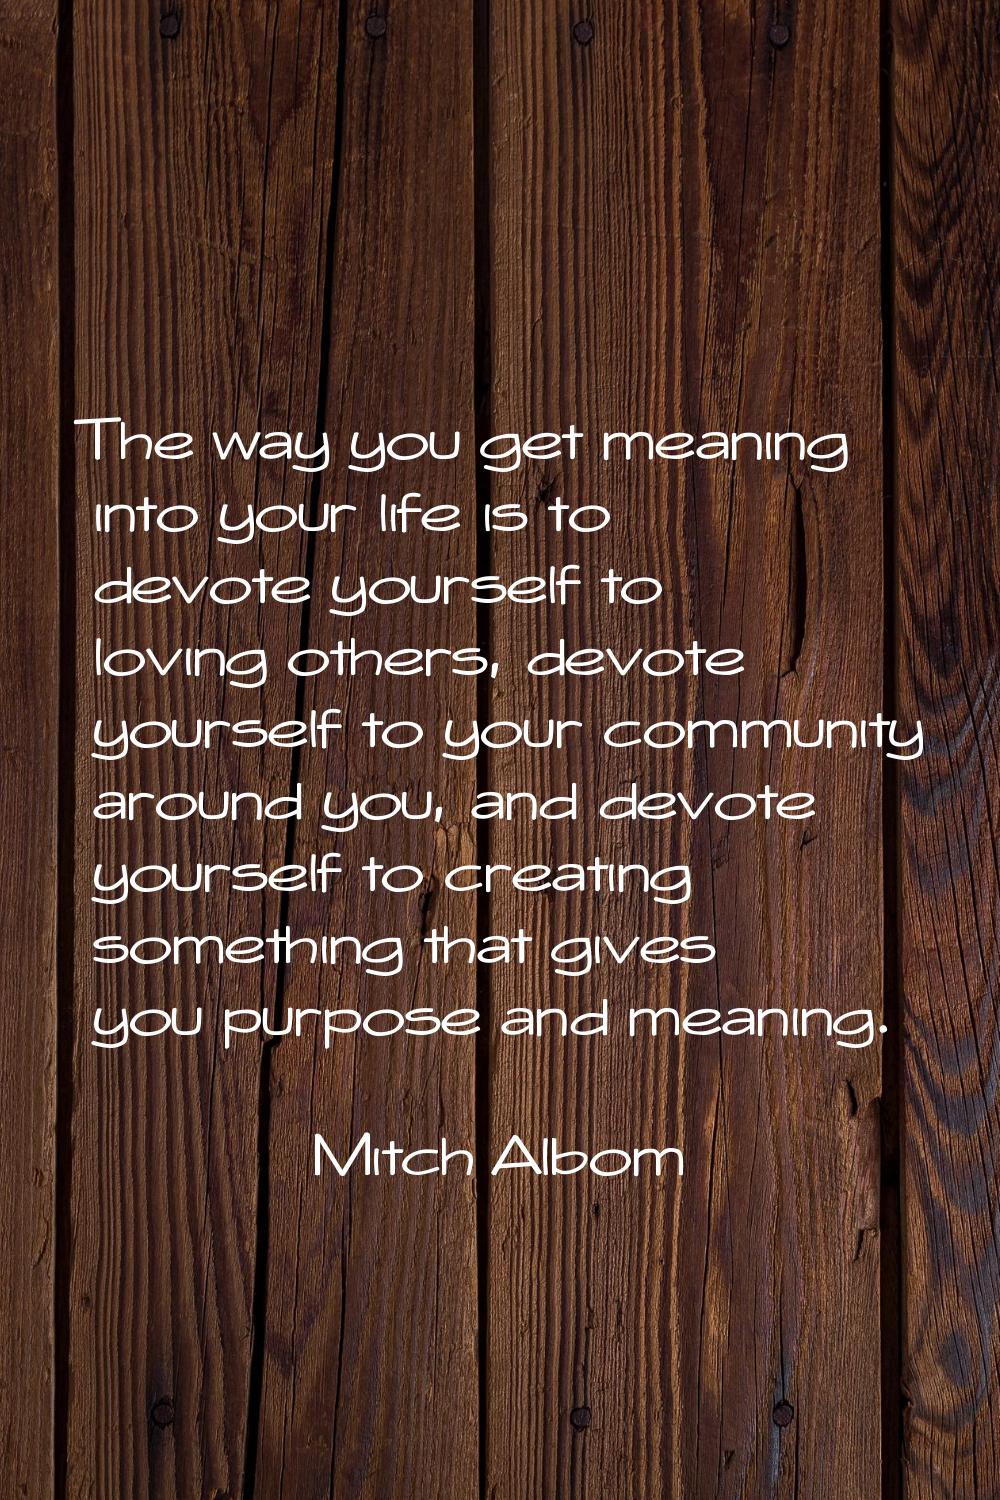 The way you get meaning into your life is to devote yourself to loving others, devote yourself to y